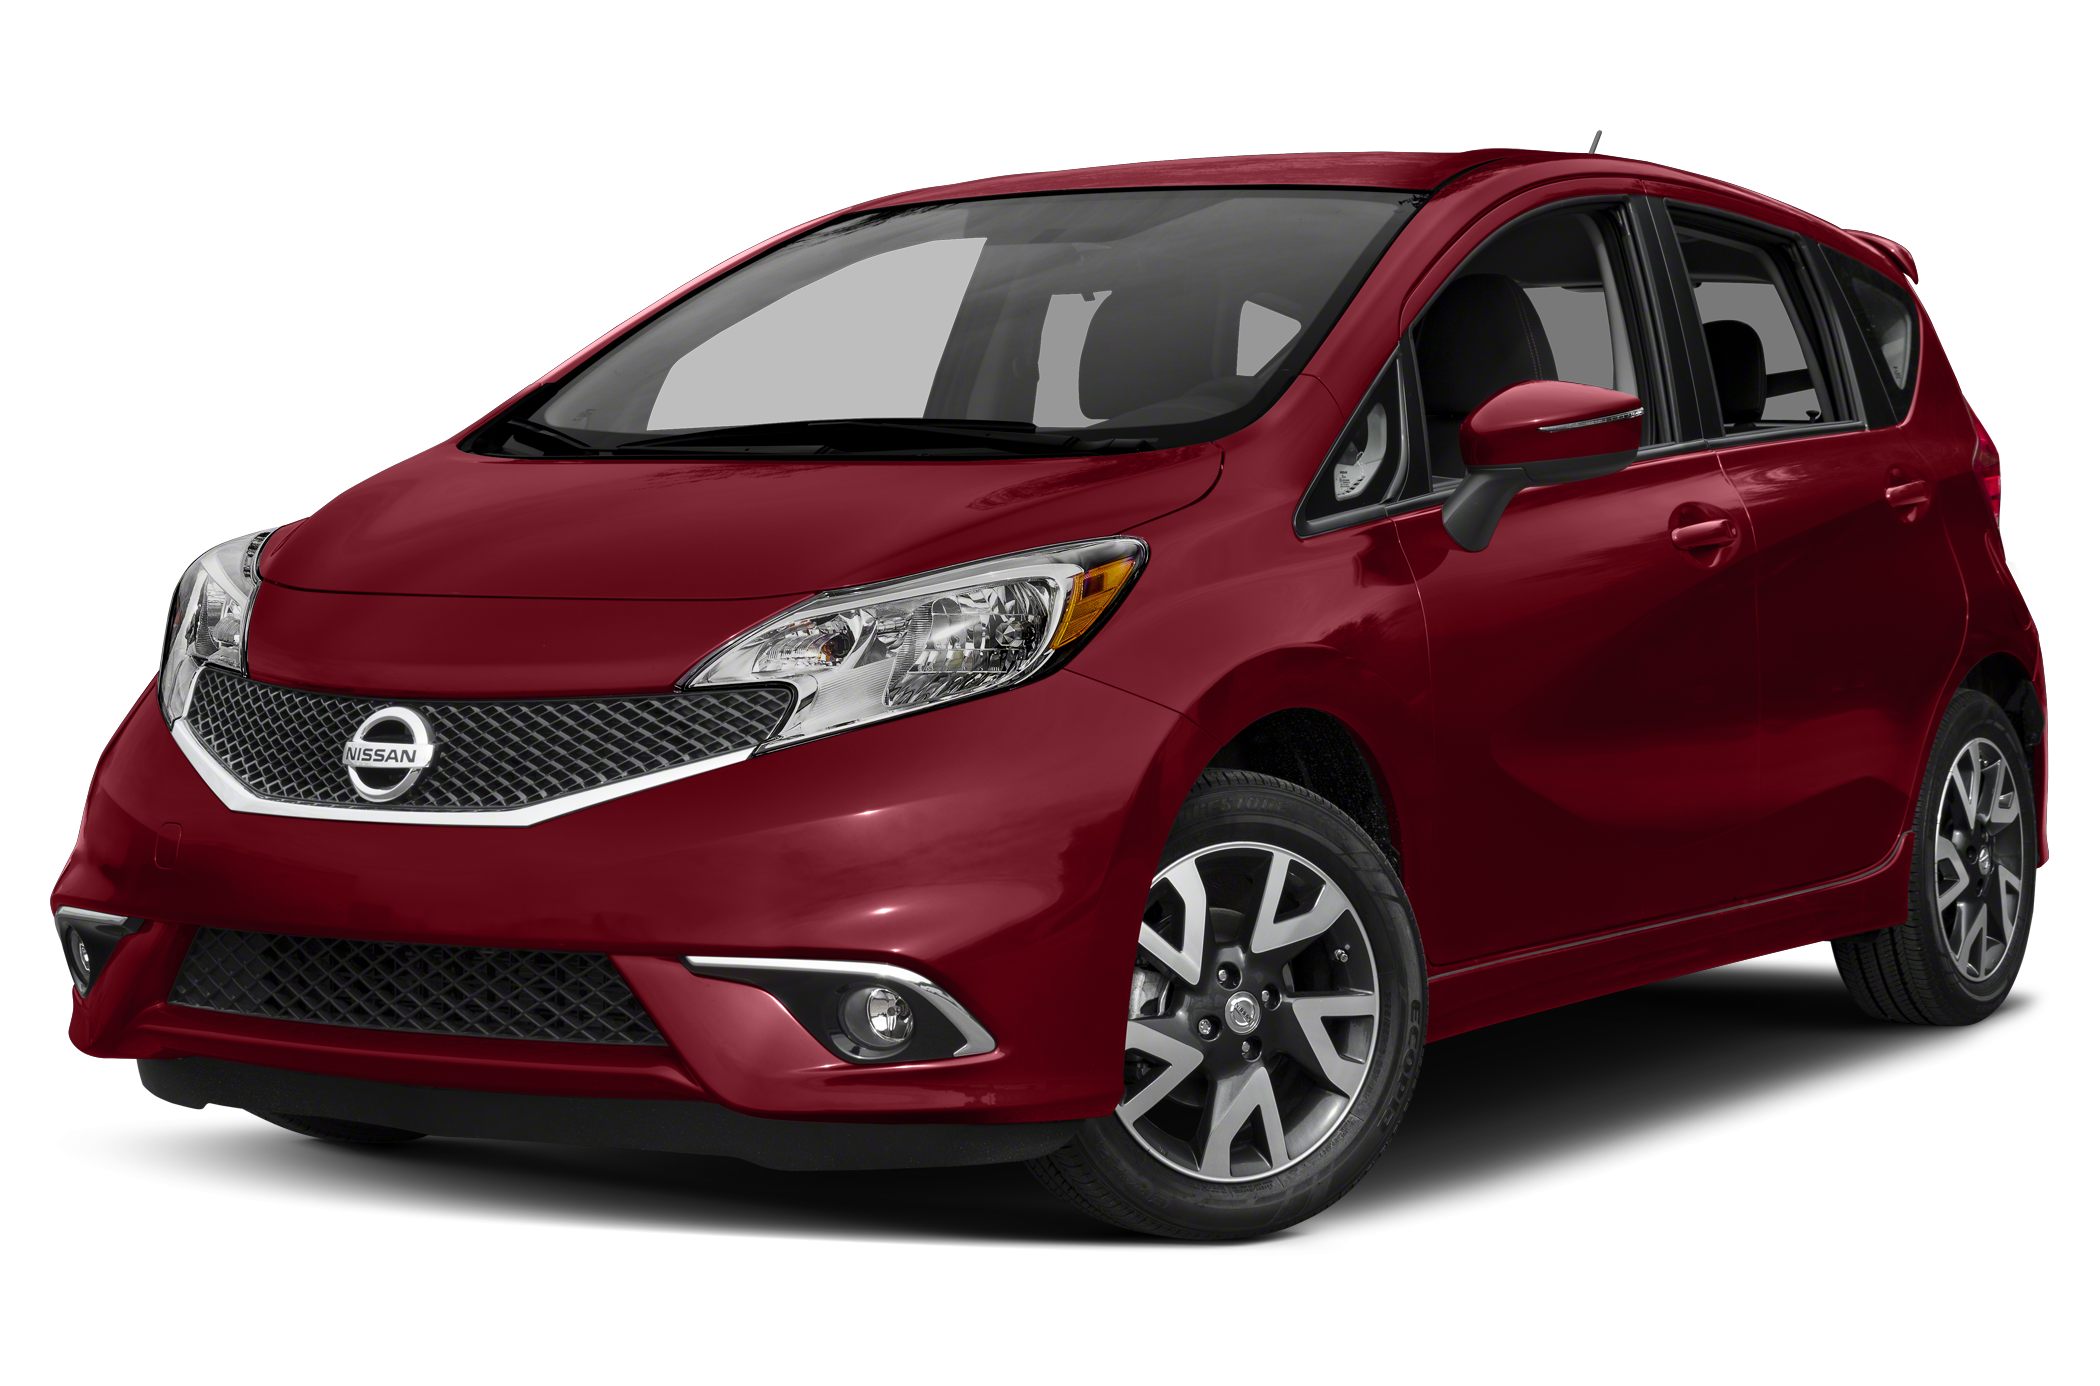 Nissan note 2018. Nissan Note 2015. Ниссан ноут 2023. Nissan Versa Note (2018). Nissan Note 2016.